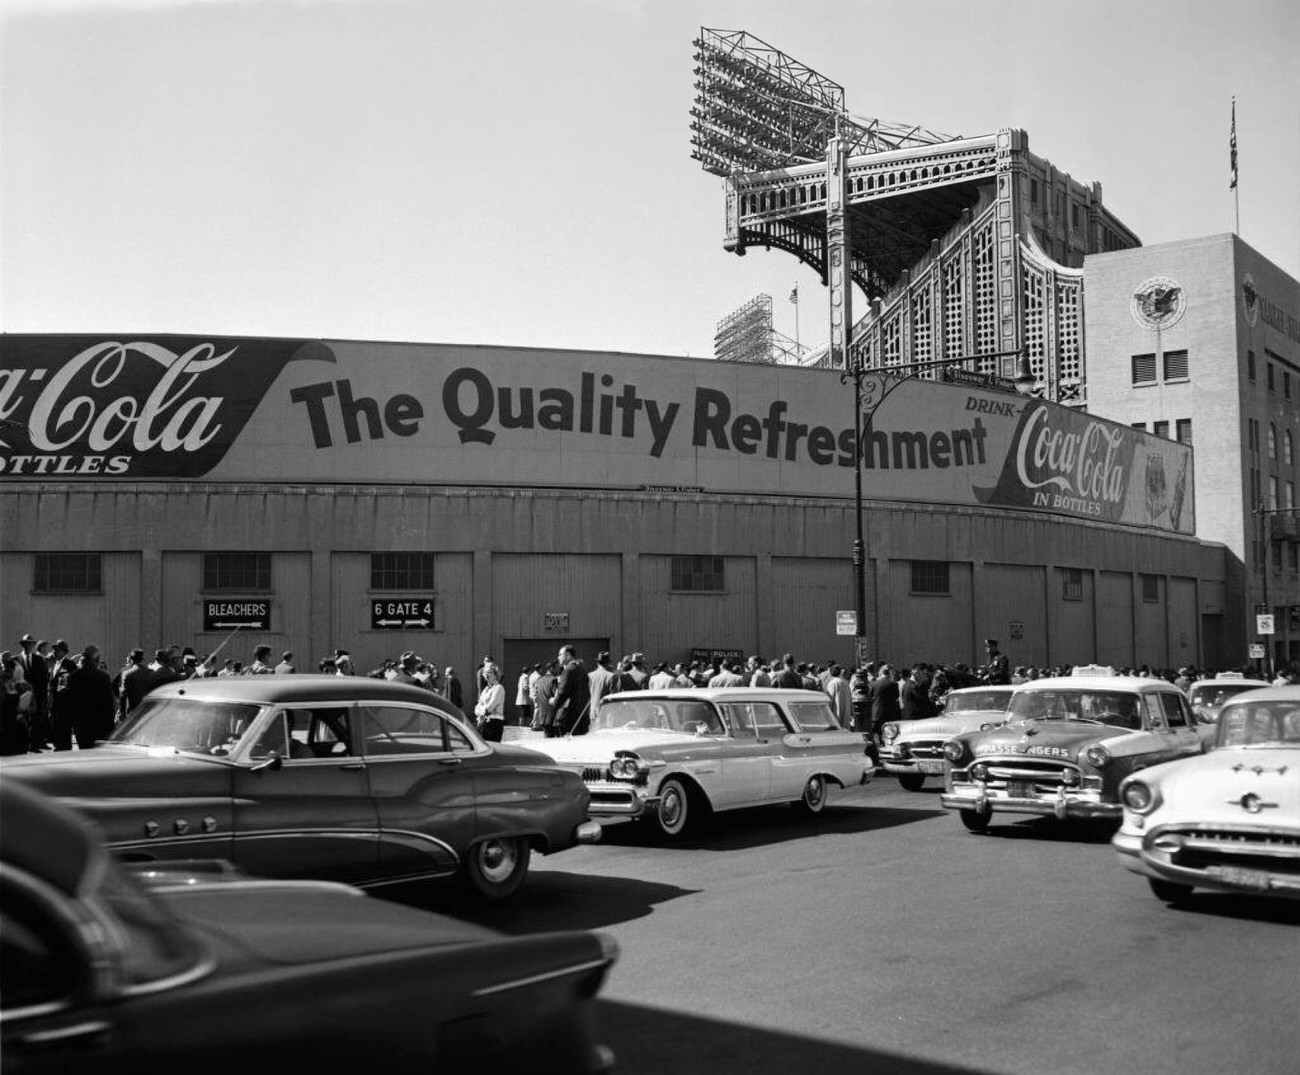 The Exterior Of Yankee Stadium With A New Coca Cola Advertisement,1957.